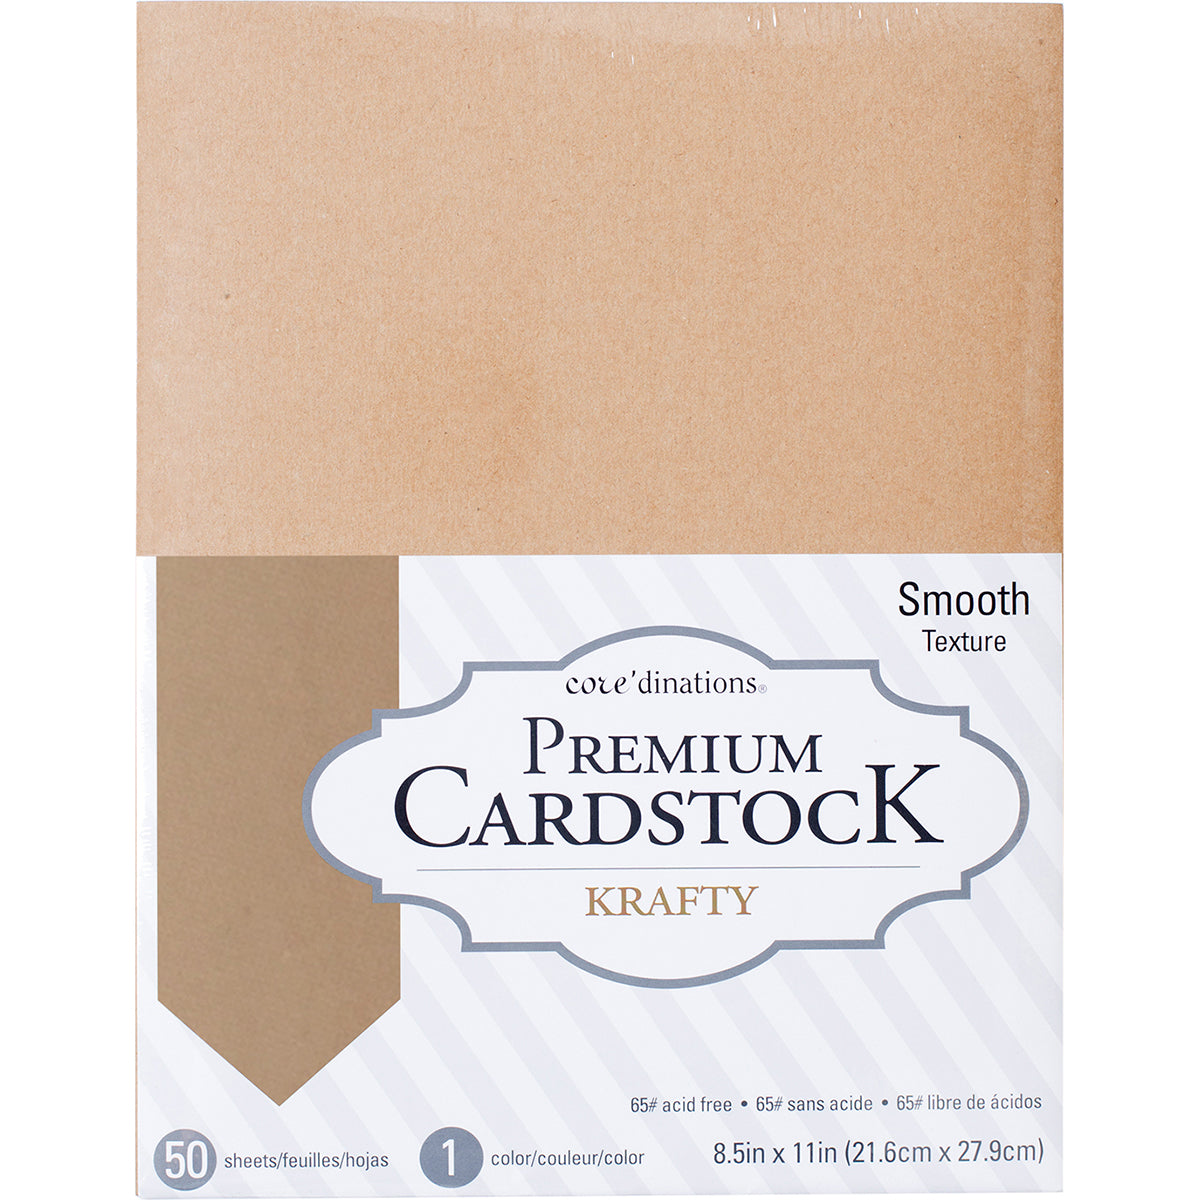 Core'dinations Value Pack Smooth Cardstock 8.5X11 40/Pkg-Vanilla Cre –  American Crafts